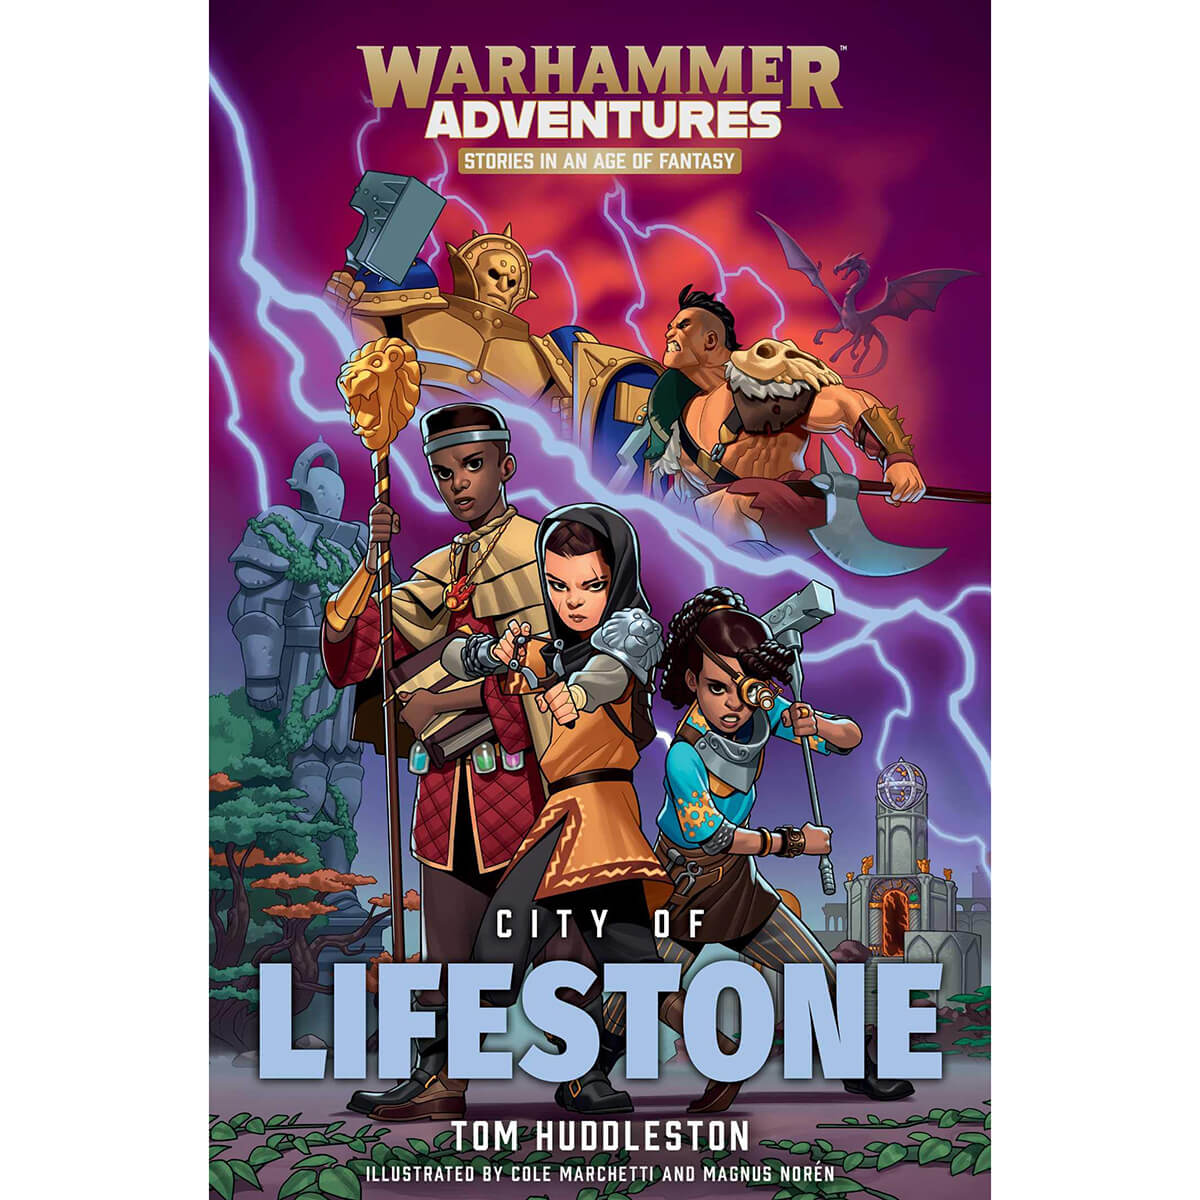 Warhammer Adventures Stories in an Age of Fantasy